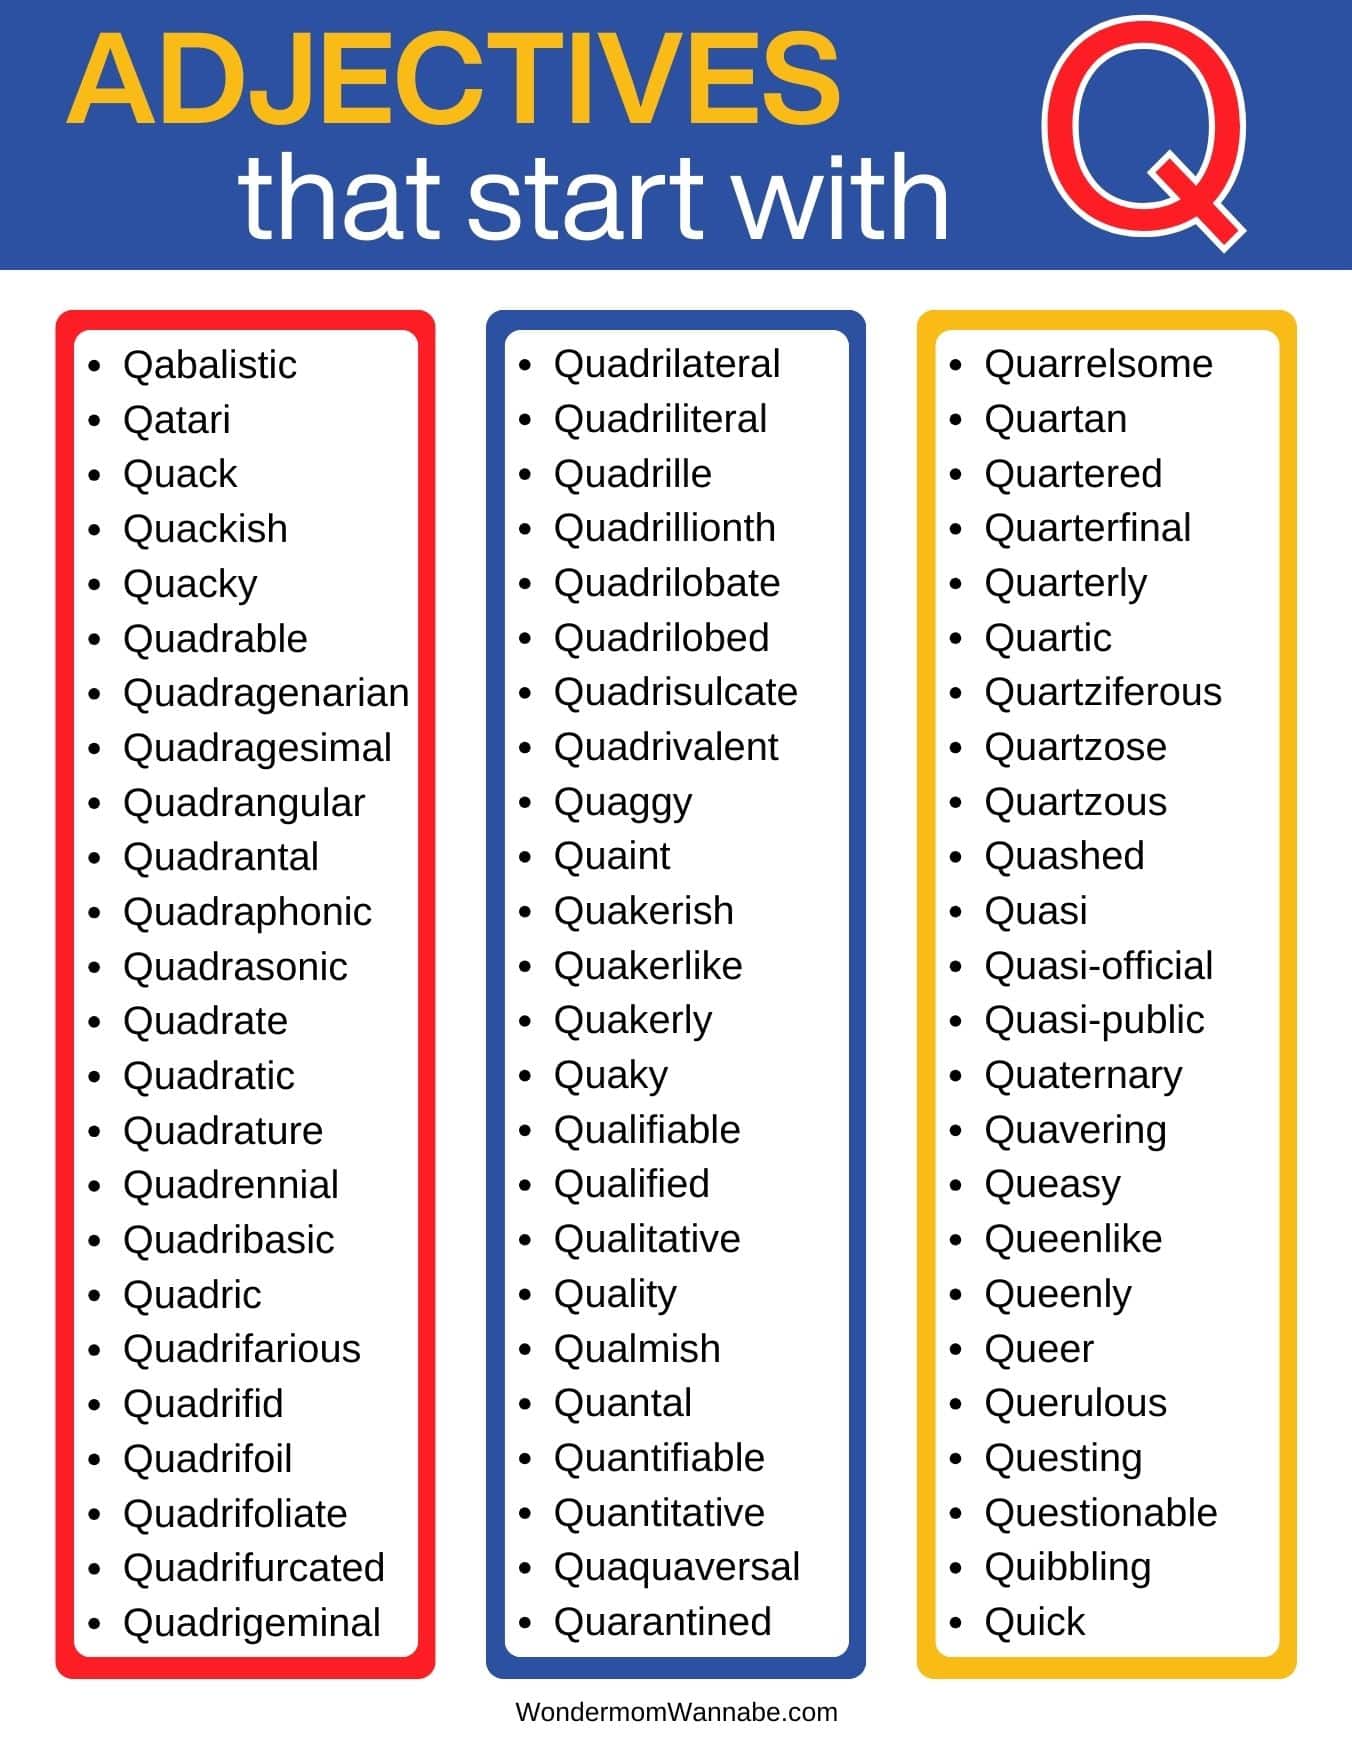 A list of adjectives that start with q.